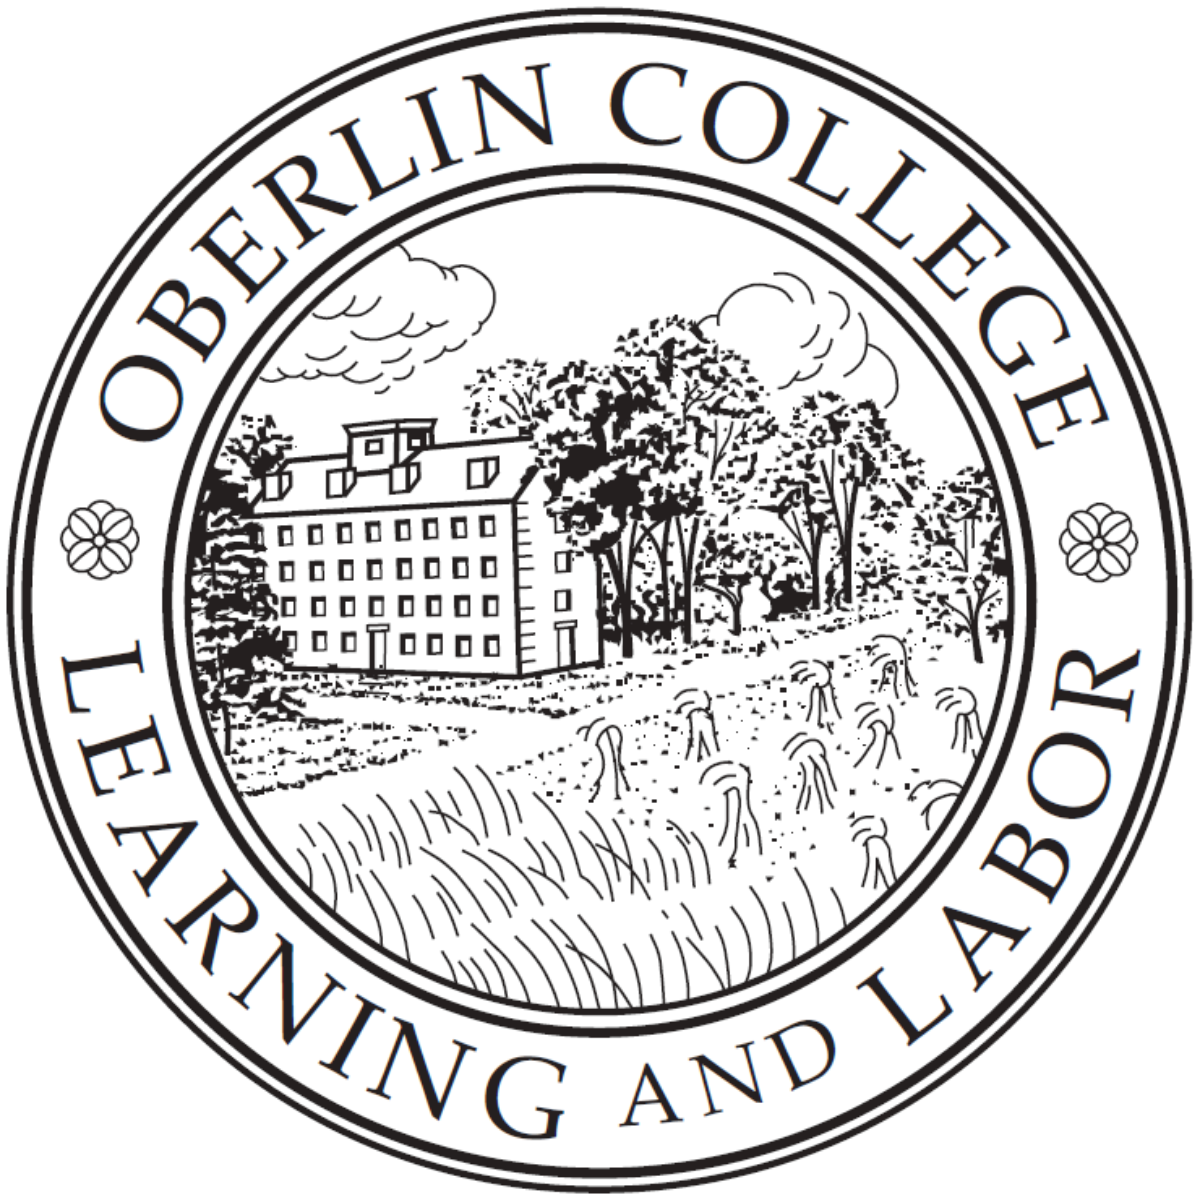 Formal_Seal_of_Oberlin_College,_Oberlin,_OH,_USA.svg.png